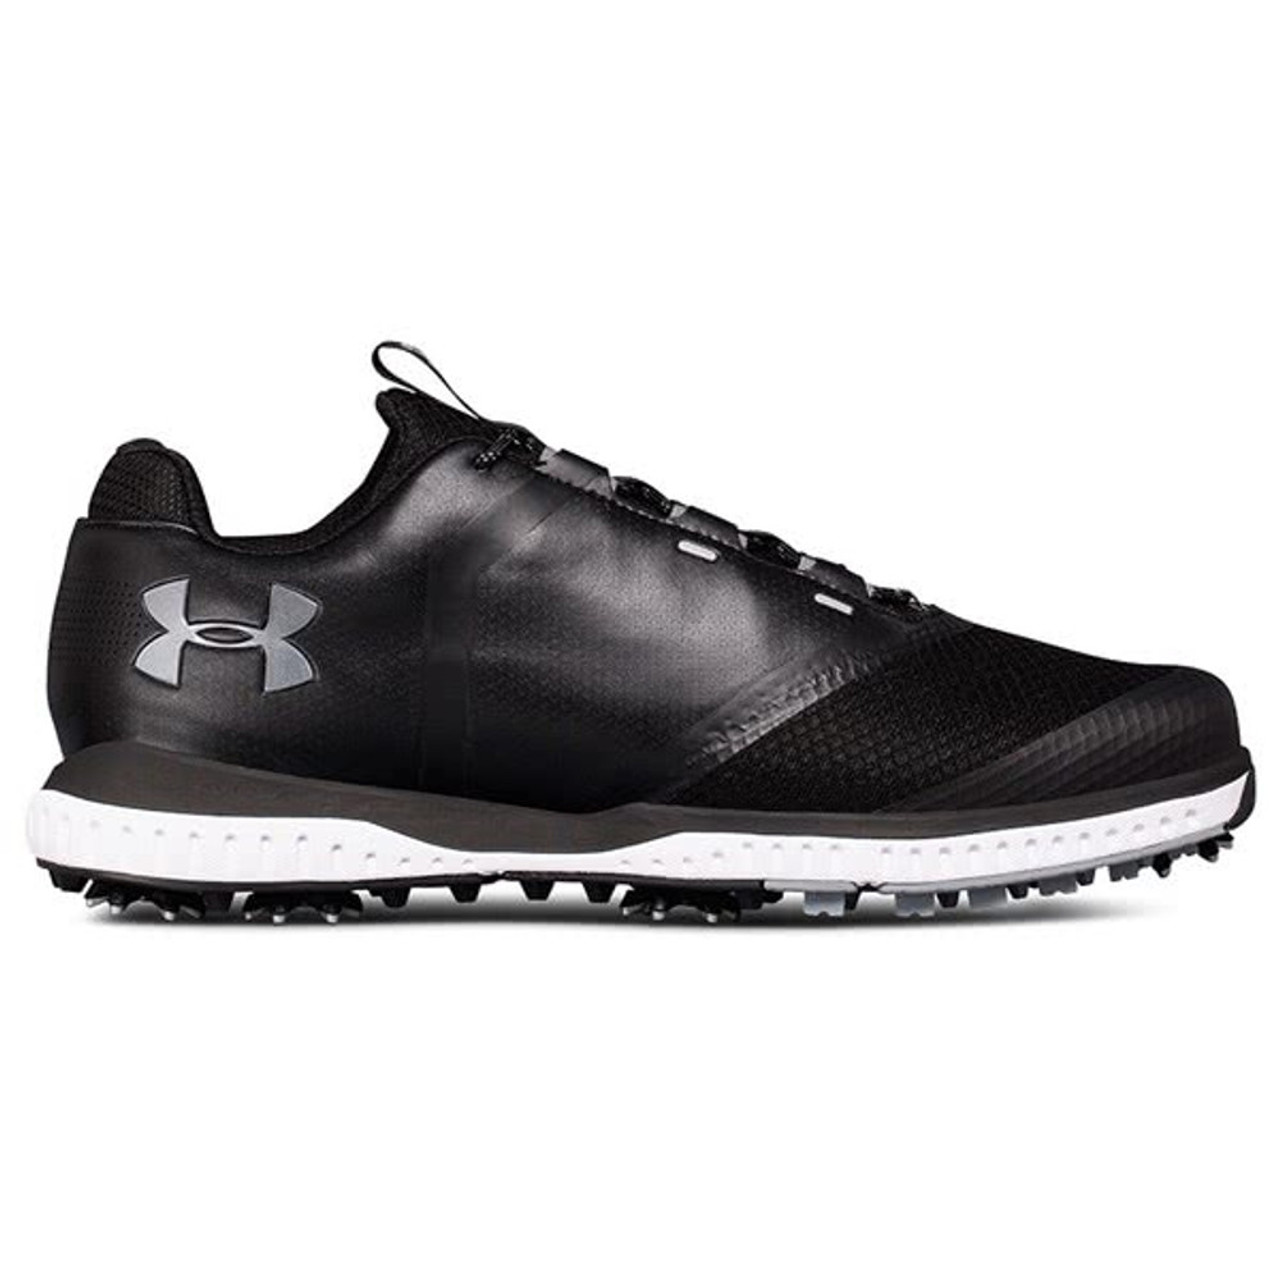 under armour fade rst golf shoes